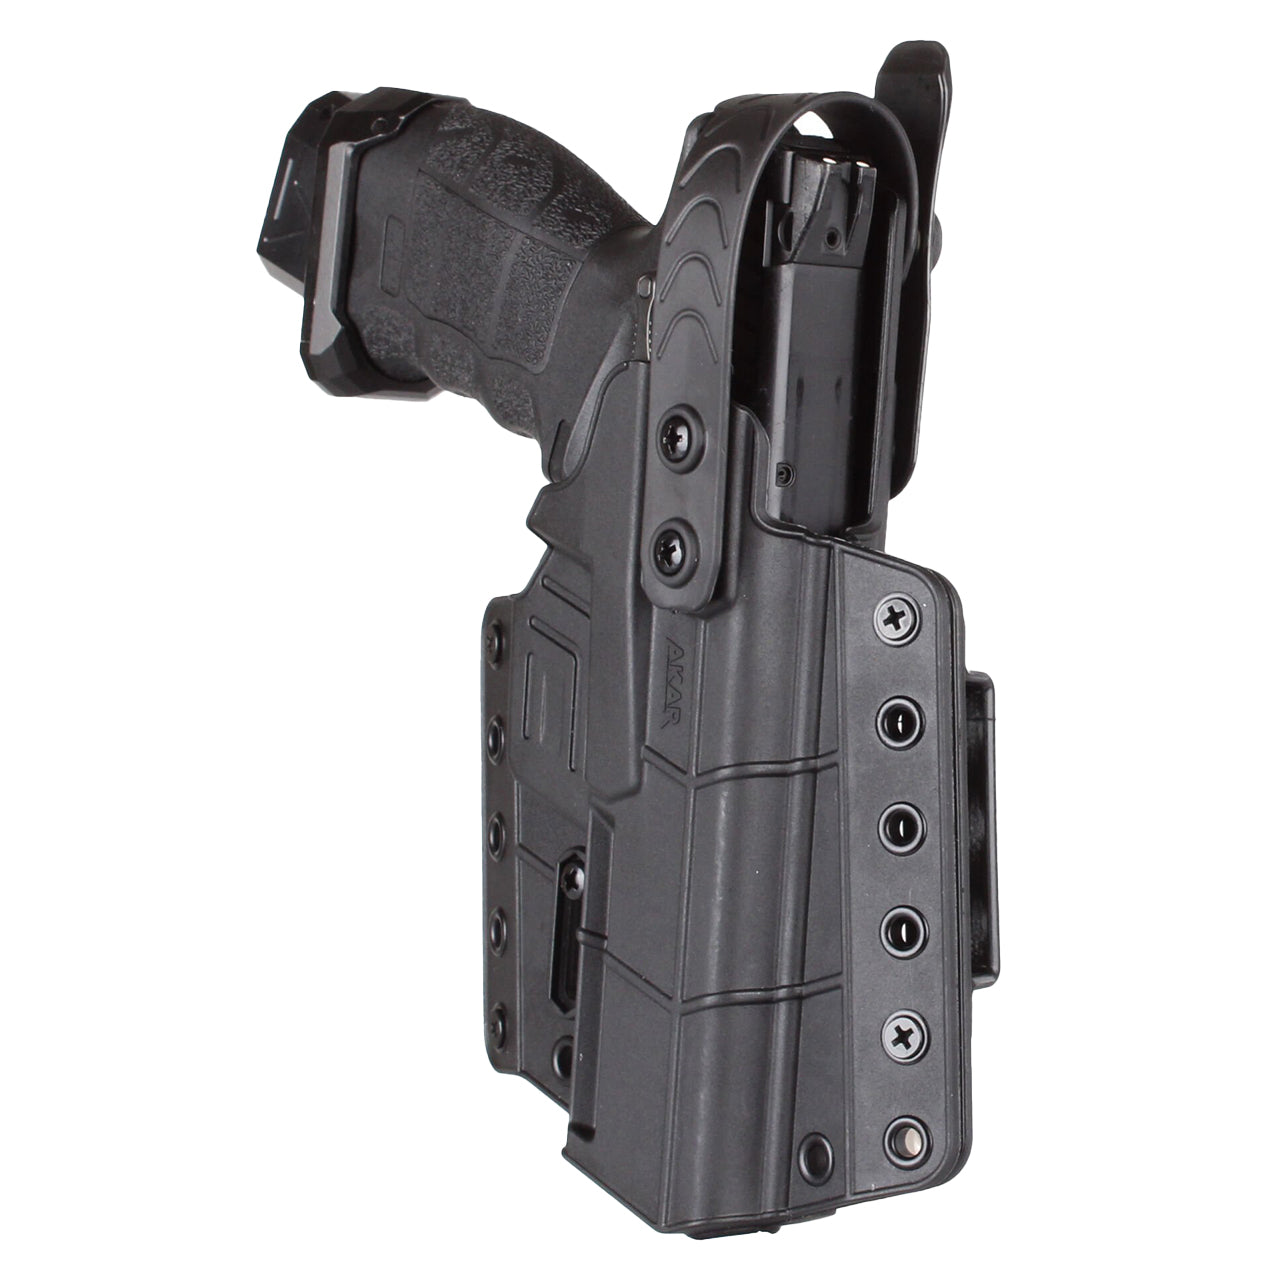 Level 2 OWB Holster Compatible with TP9DA, TP9SA MOD.2, TP9SF, TP9SF ELITE-S, TP9SA, TP9 COMBAT, TP9 MeteS, Outside Waistband Carry Holster with Retention